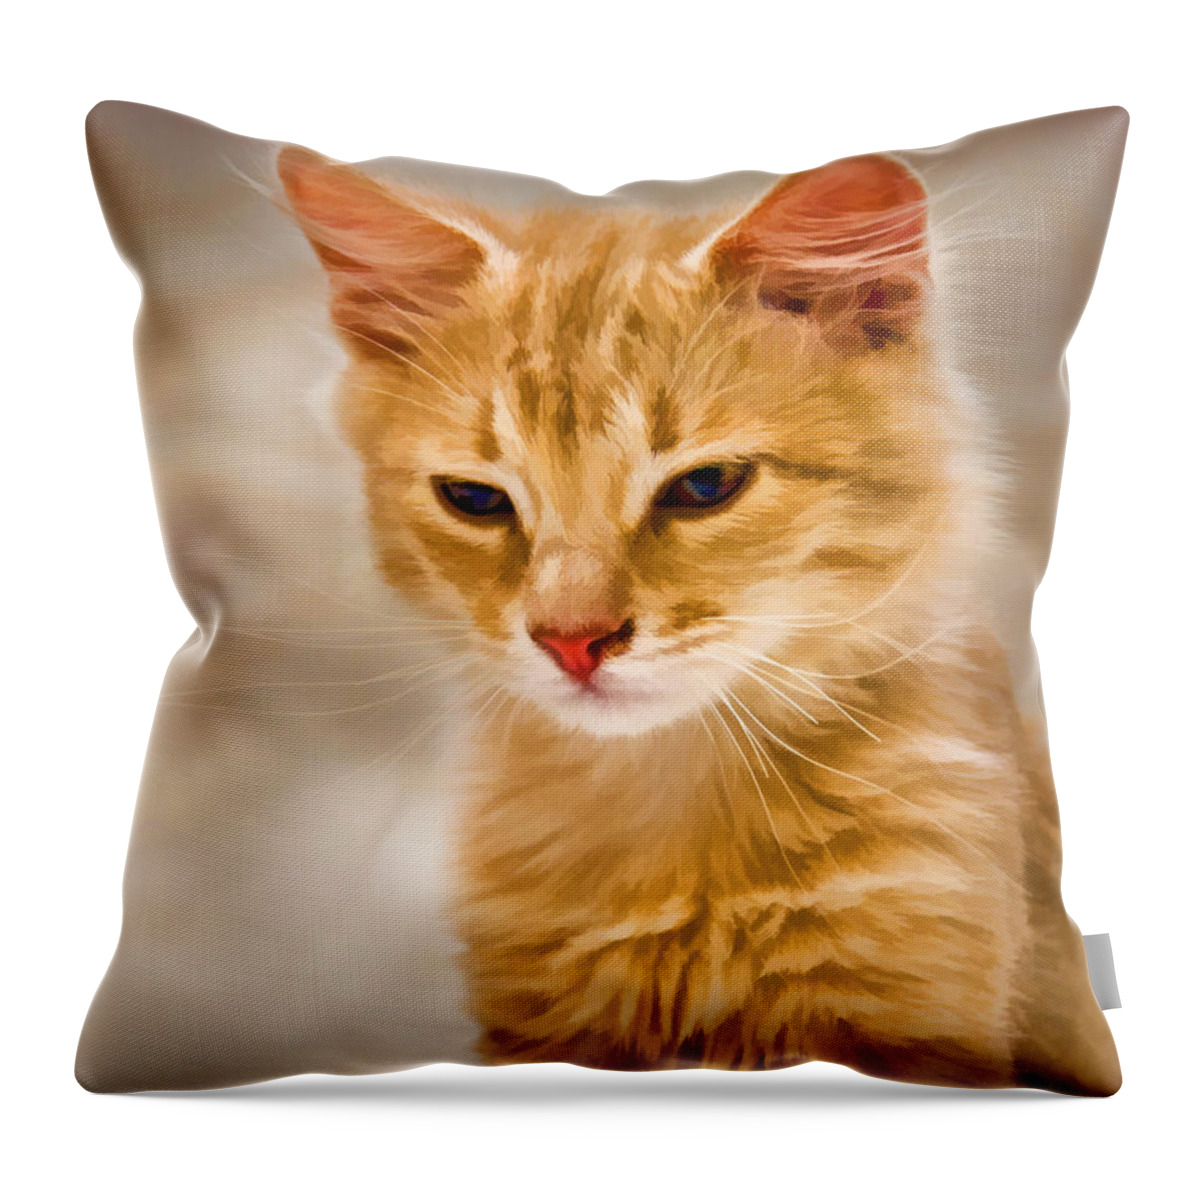 Blonde Throw Pillow featuring the painting Blondie by Steven Richardson